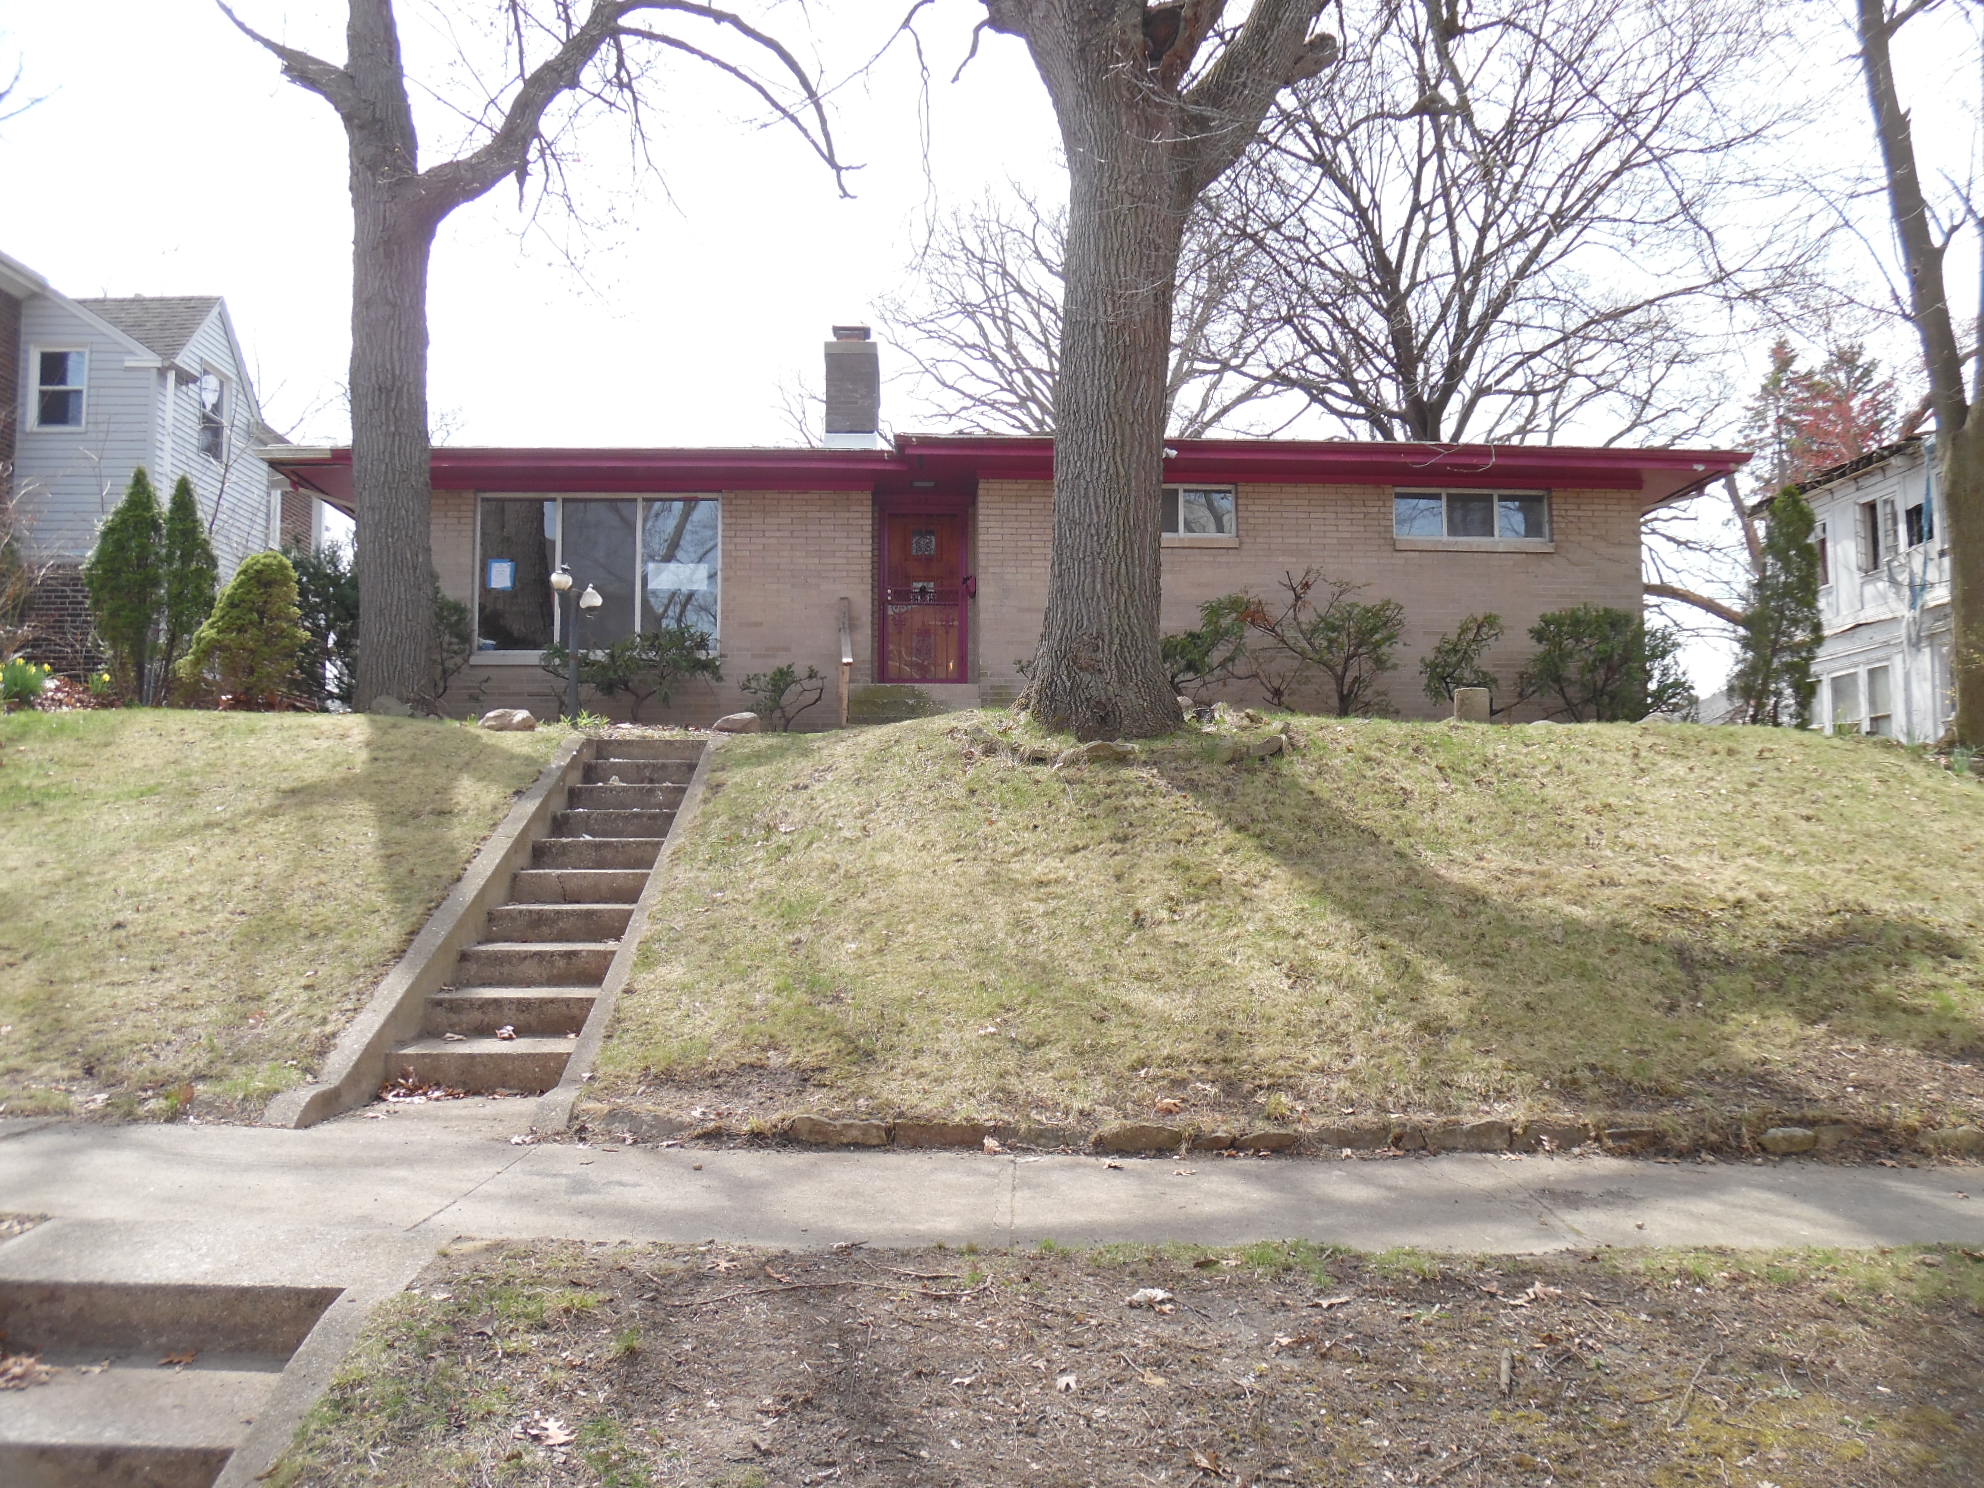 109 W 43rd Ave, Gary, IN 46408 